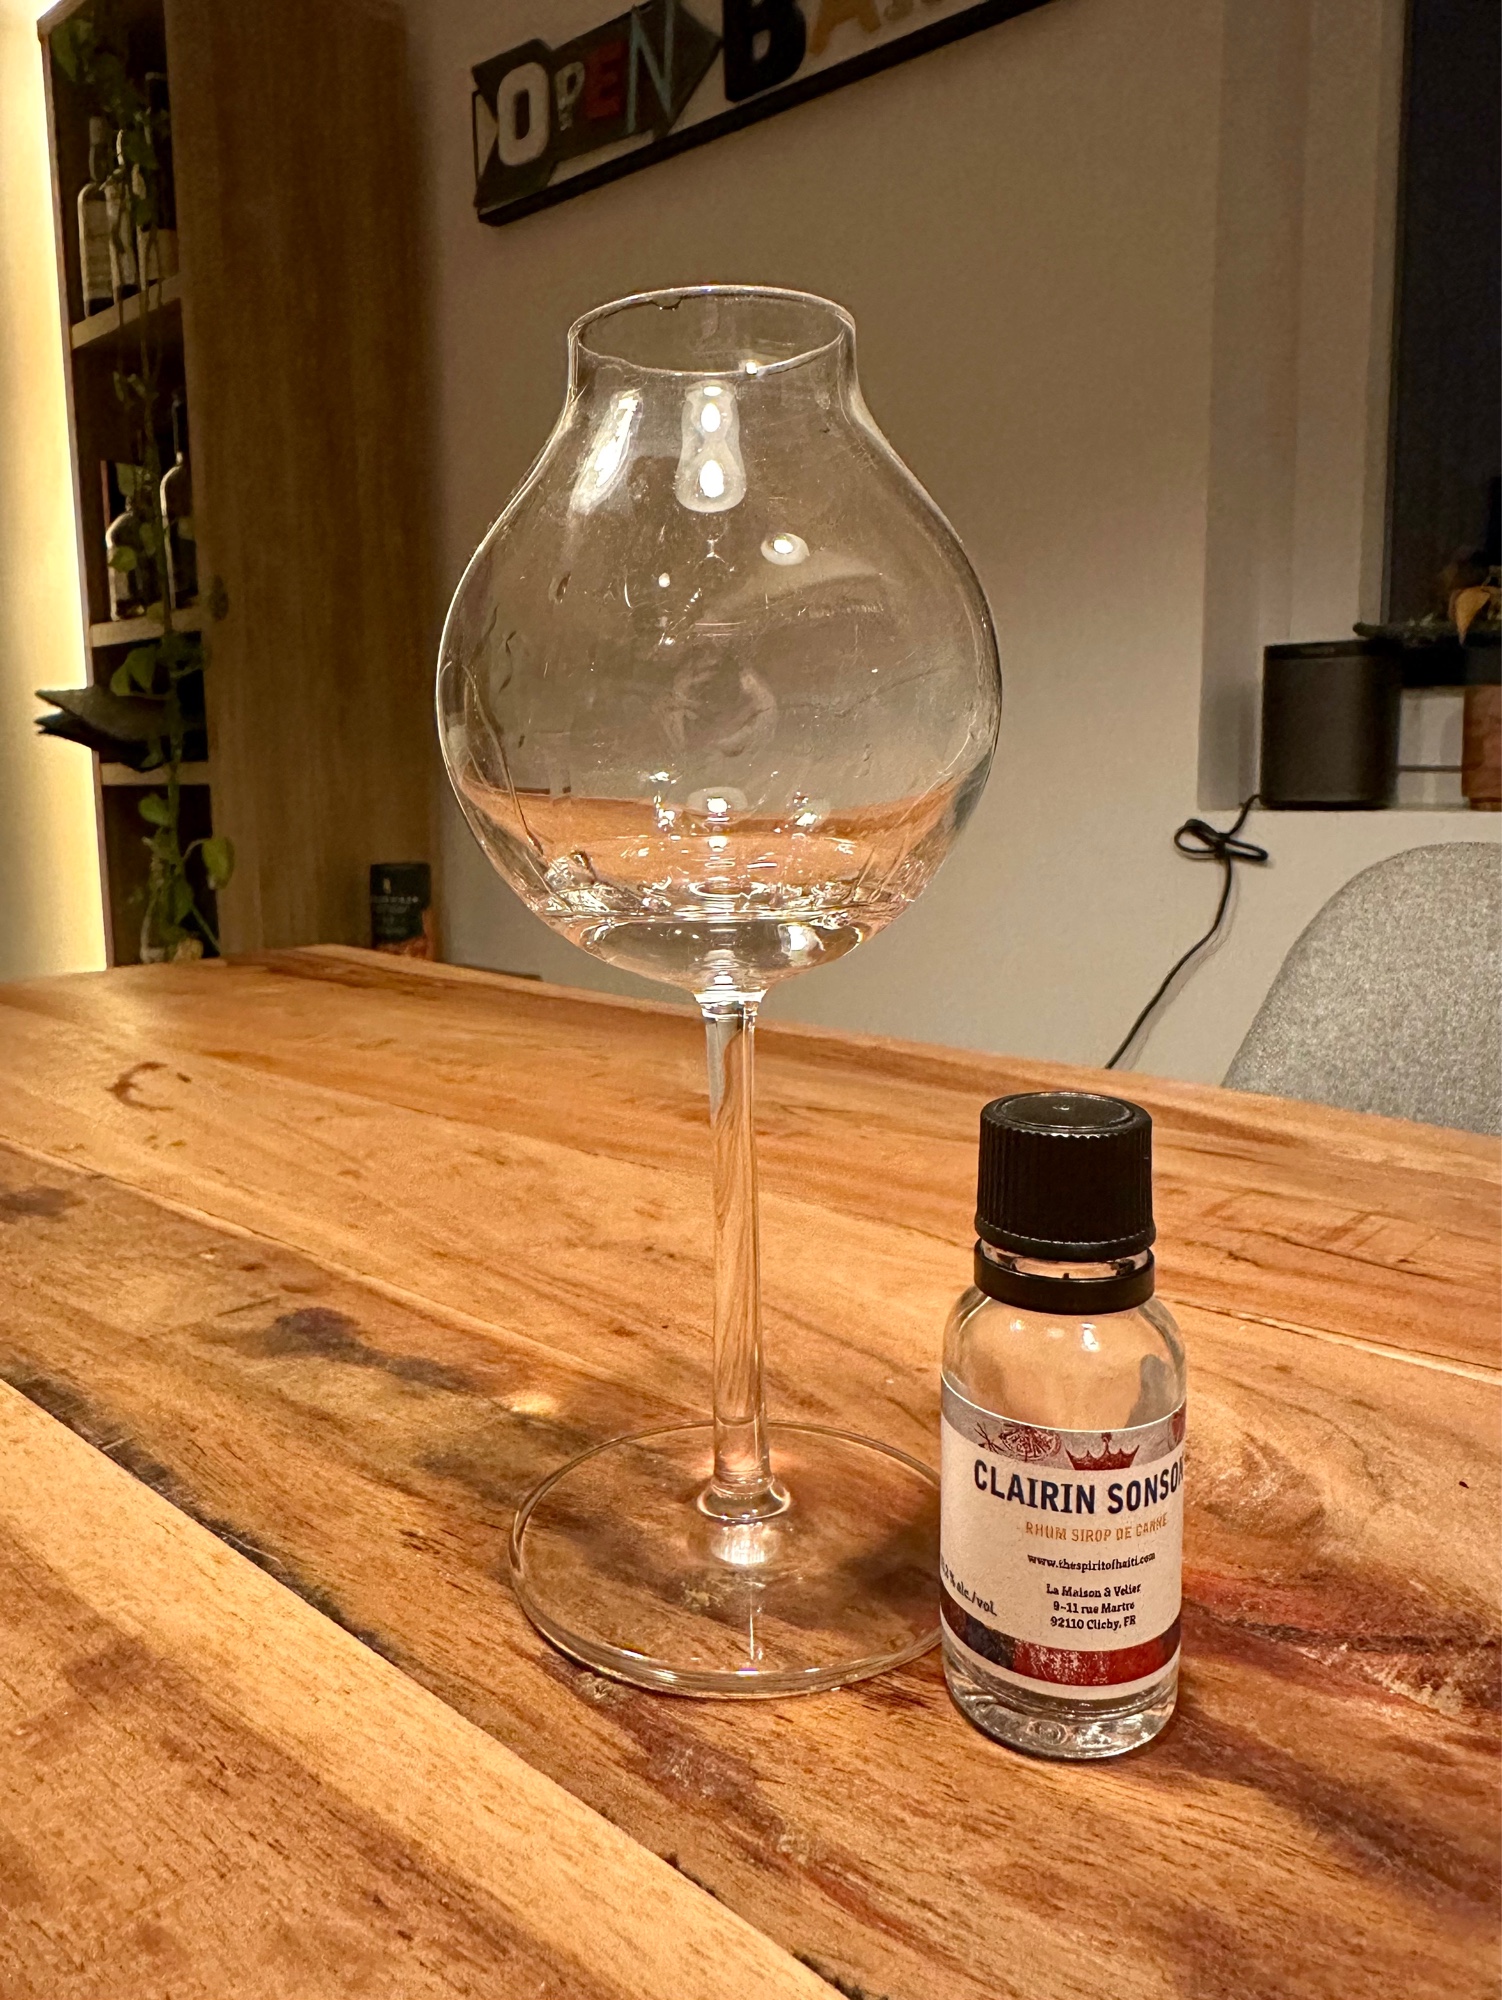 Photo of the bottle taken from user Oliver